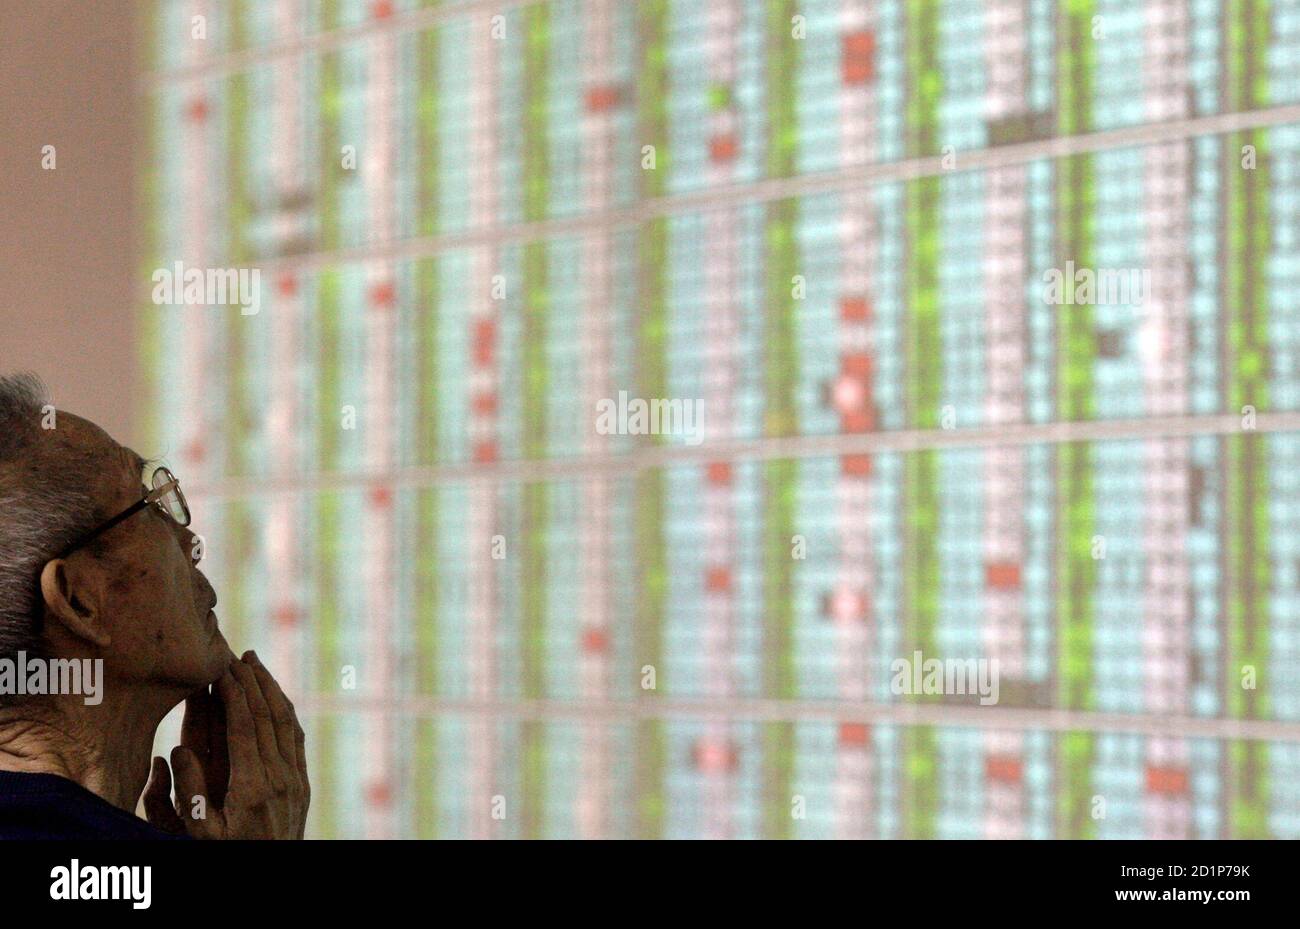 A person gestures while monitoring stock market prices inside a securities bank in Taipei May 7, 2010. Taiwan stocks fell 0.16 percent on Friday to a more than two-month closing low, dragged down by worries over a European credit crunch and a slump in Wall Street, but analysts say state funds stepped in to prop up prices.   REUTERS/Pichi Chuang (TAIWAN - Tags: BUSINESS) Stock Photo